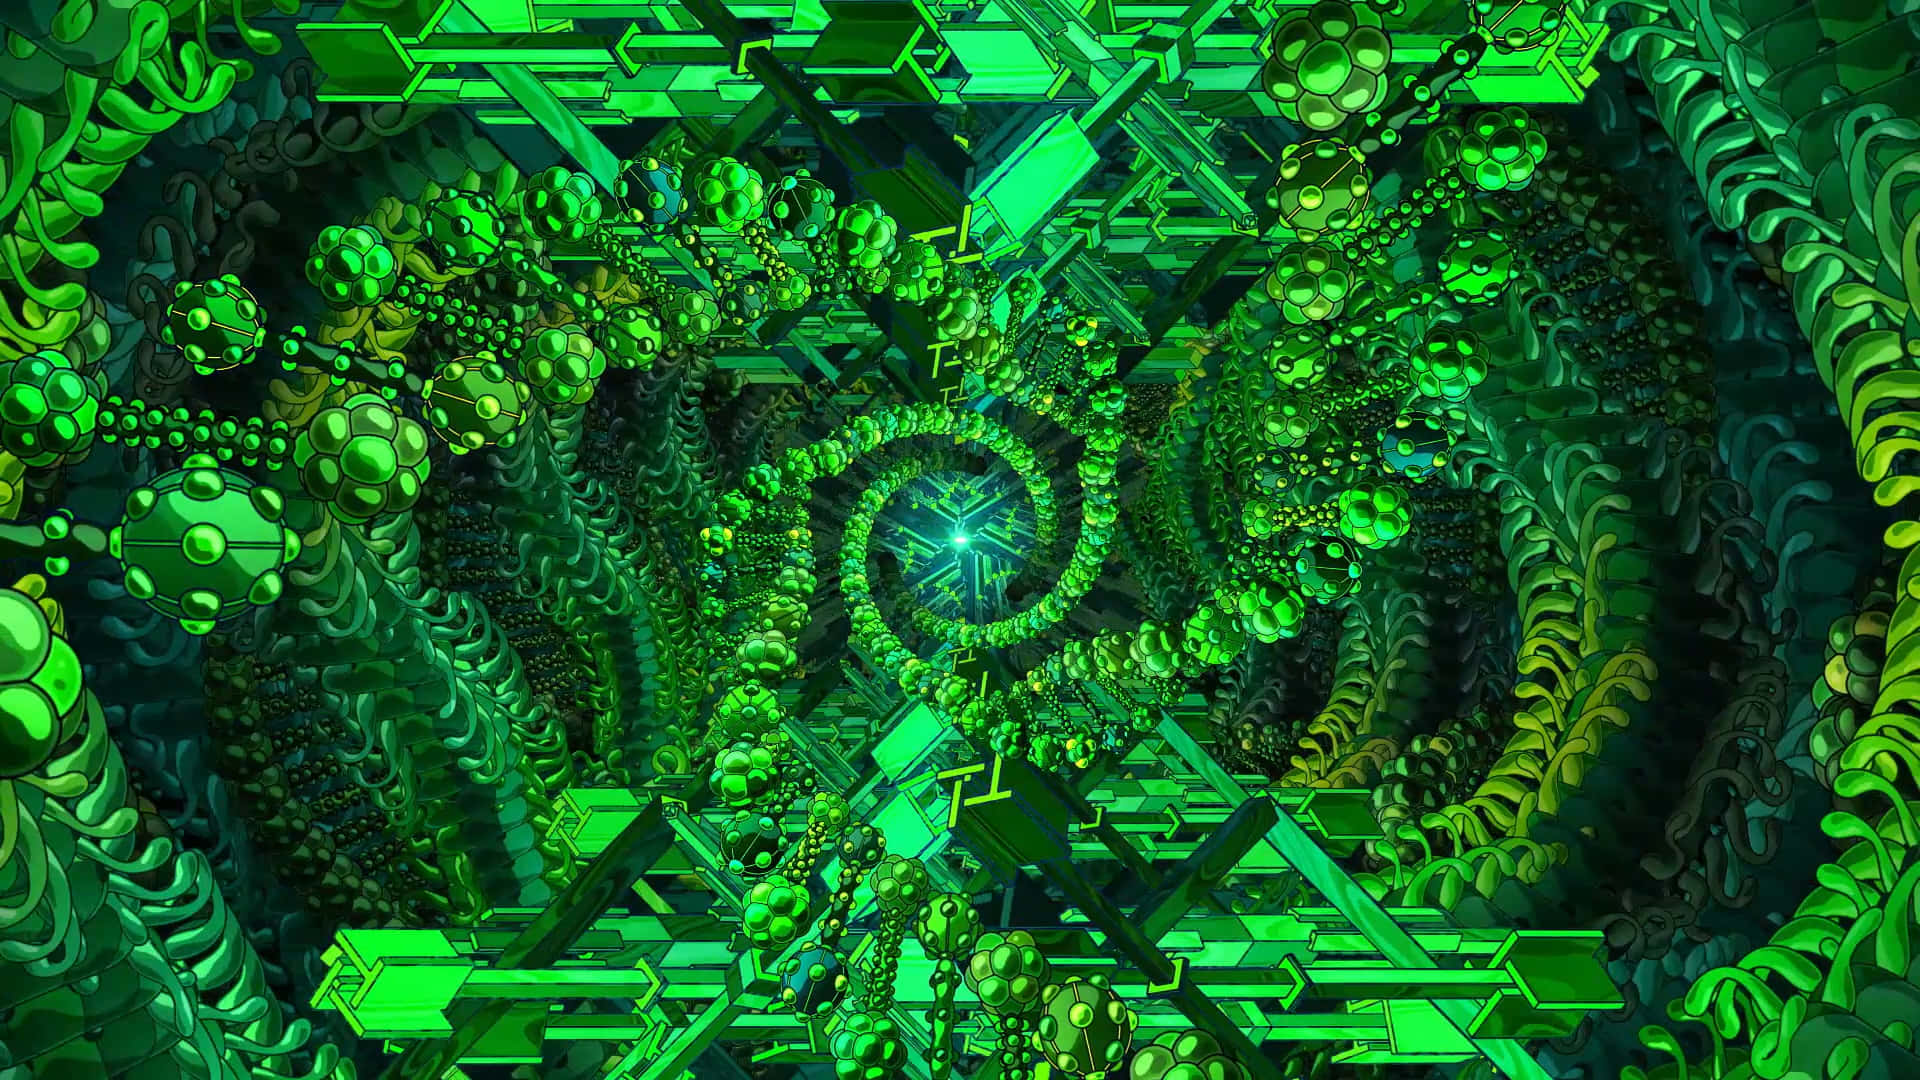 Green Spiral Objects In The Disjointed Video Wallpaper